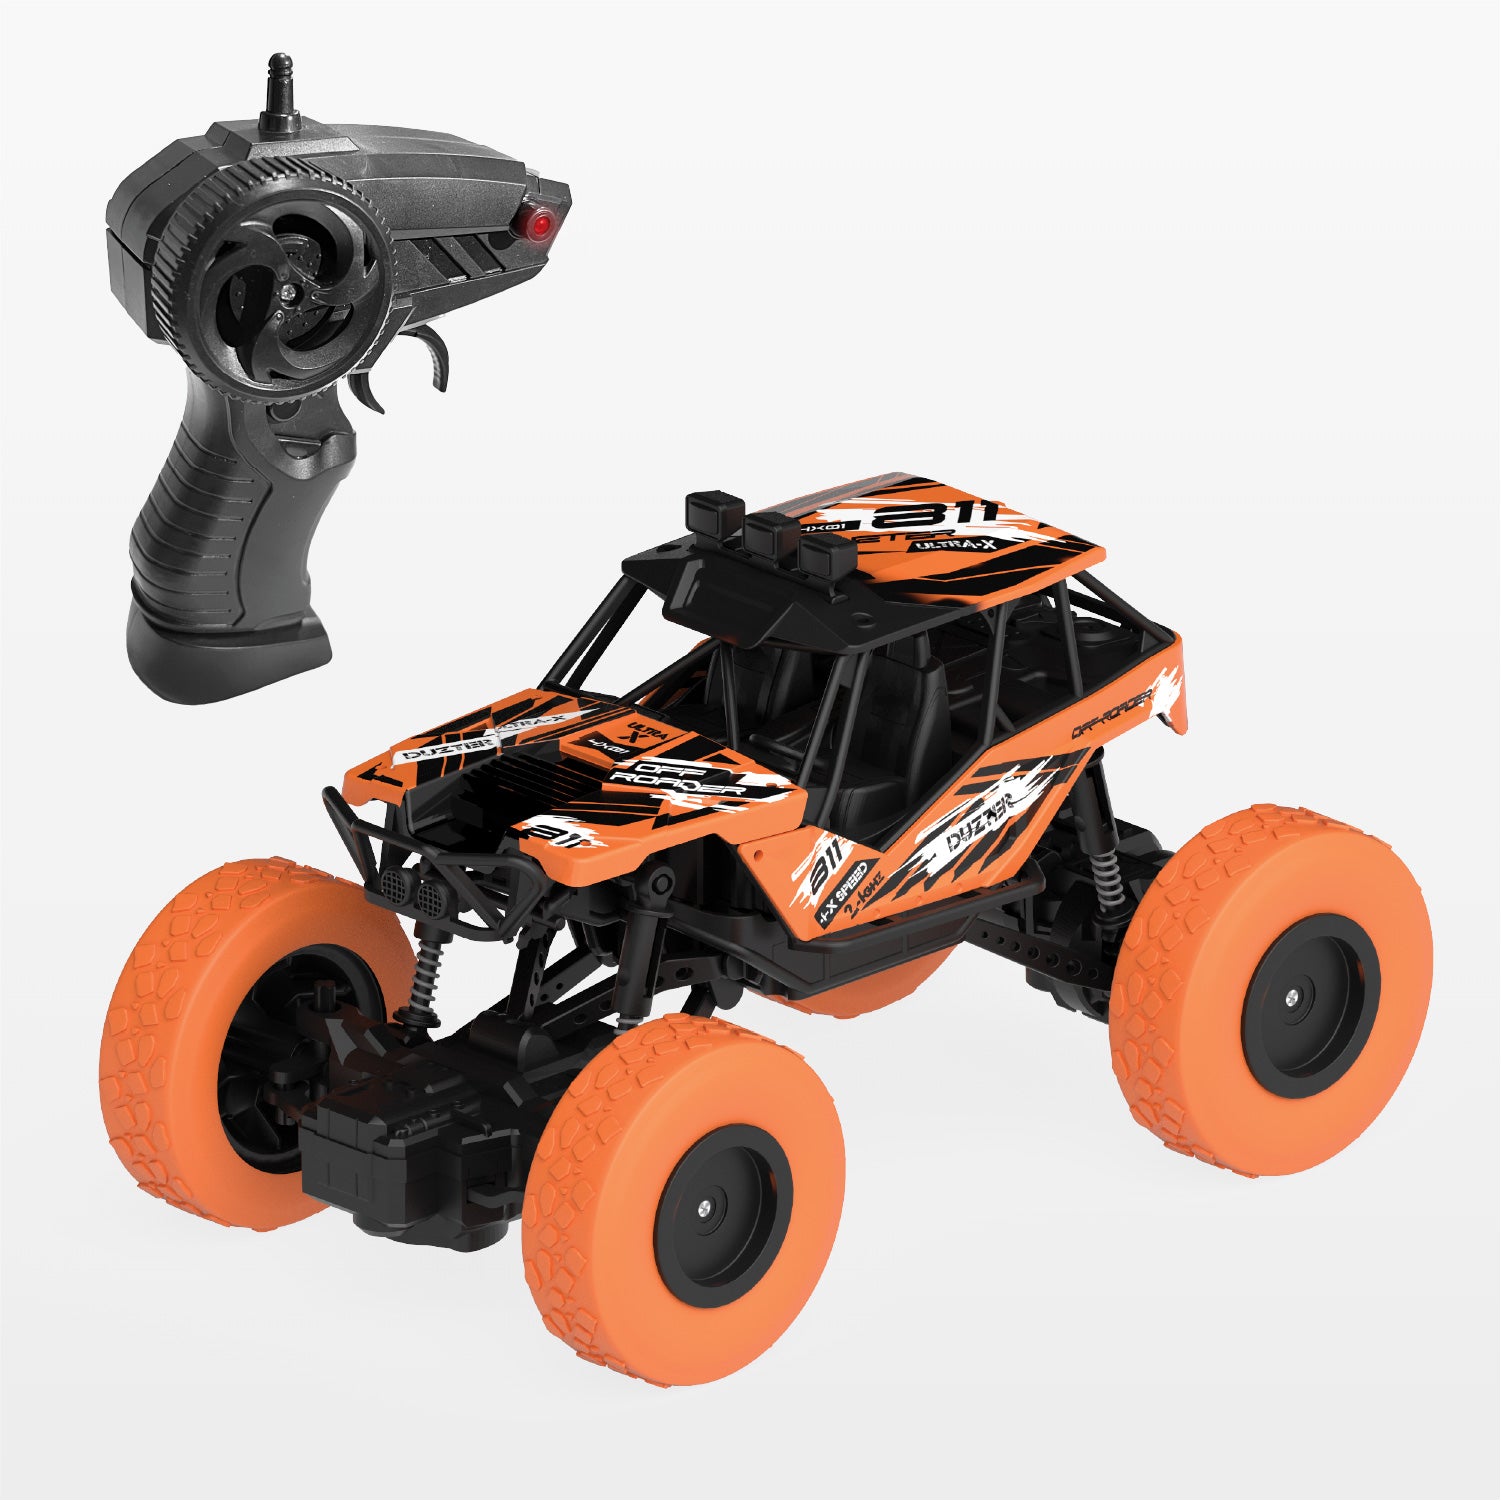 DUZTER- RC Car Spring Suspensions | 2WD Rock Crawler | Fun RC Toy and Gift for Kids and Boys